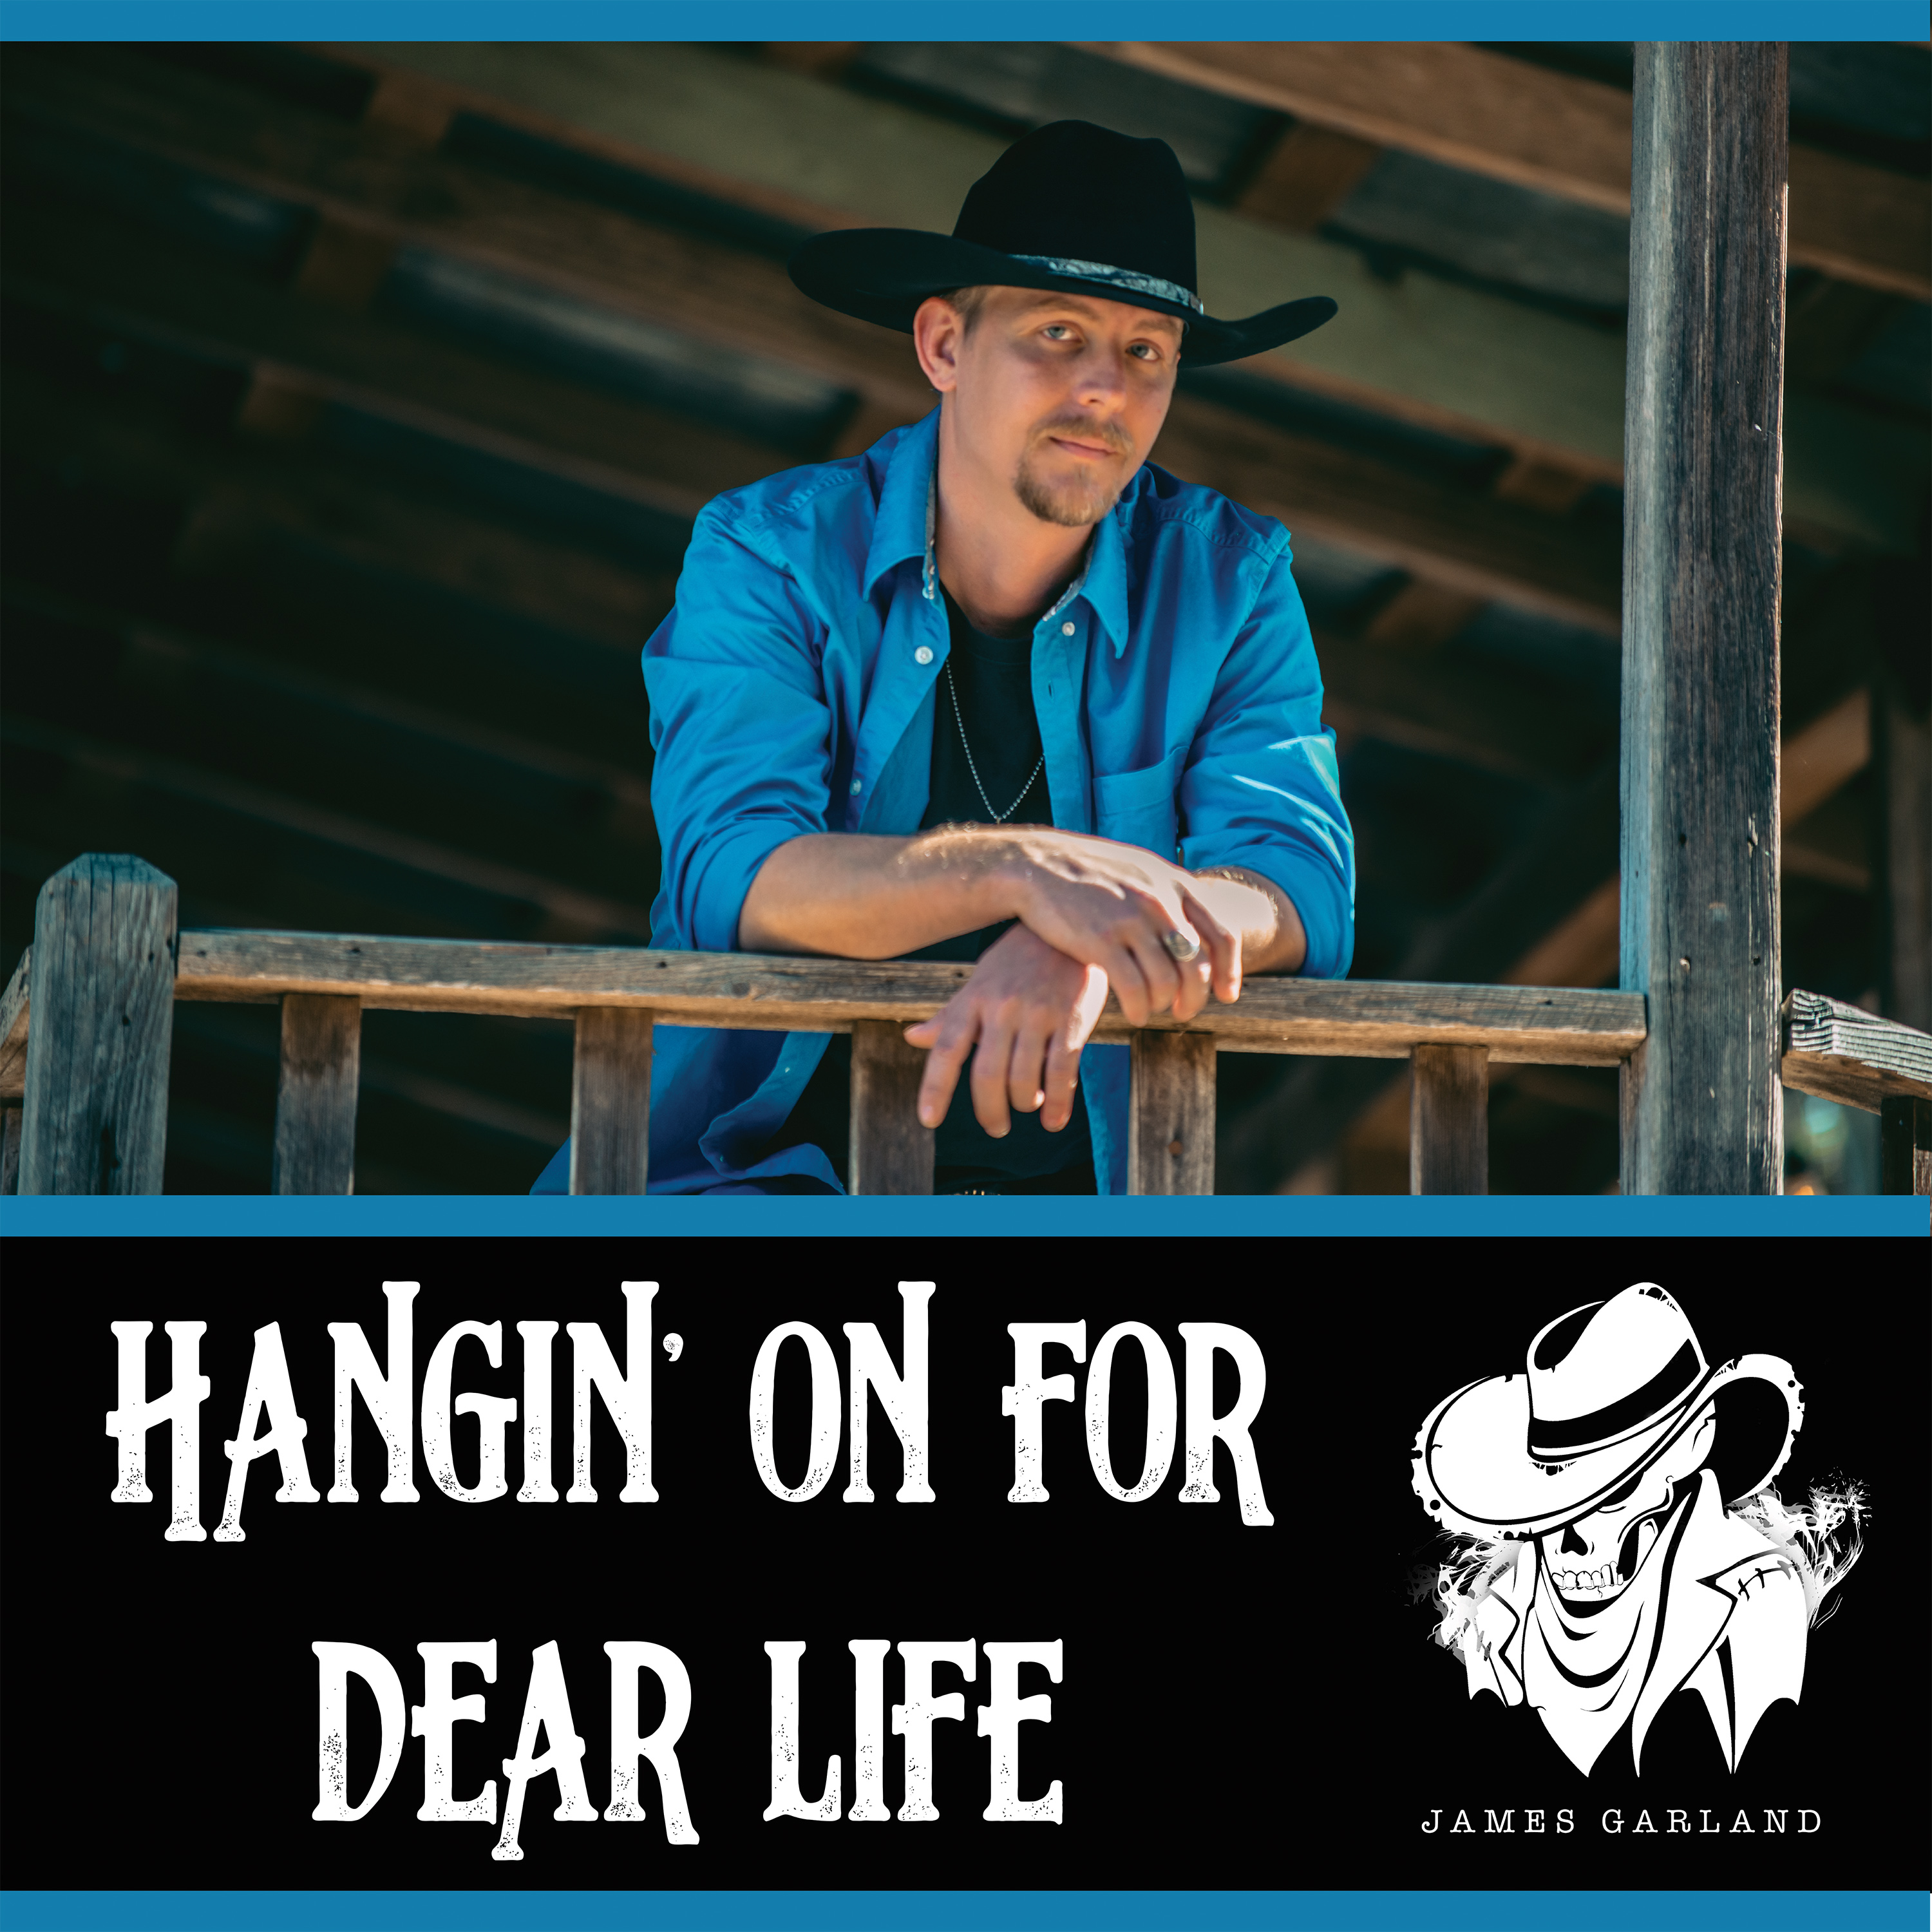 Art for Hangin' on for Dear Life by James Garland